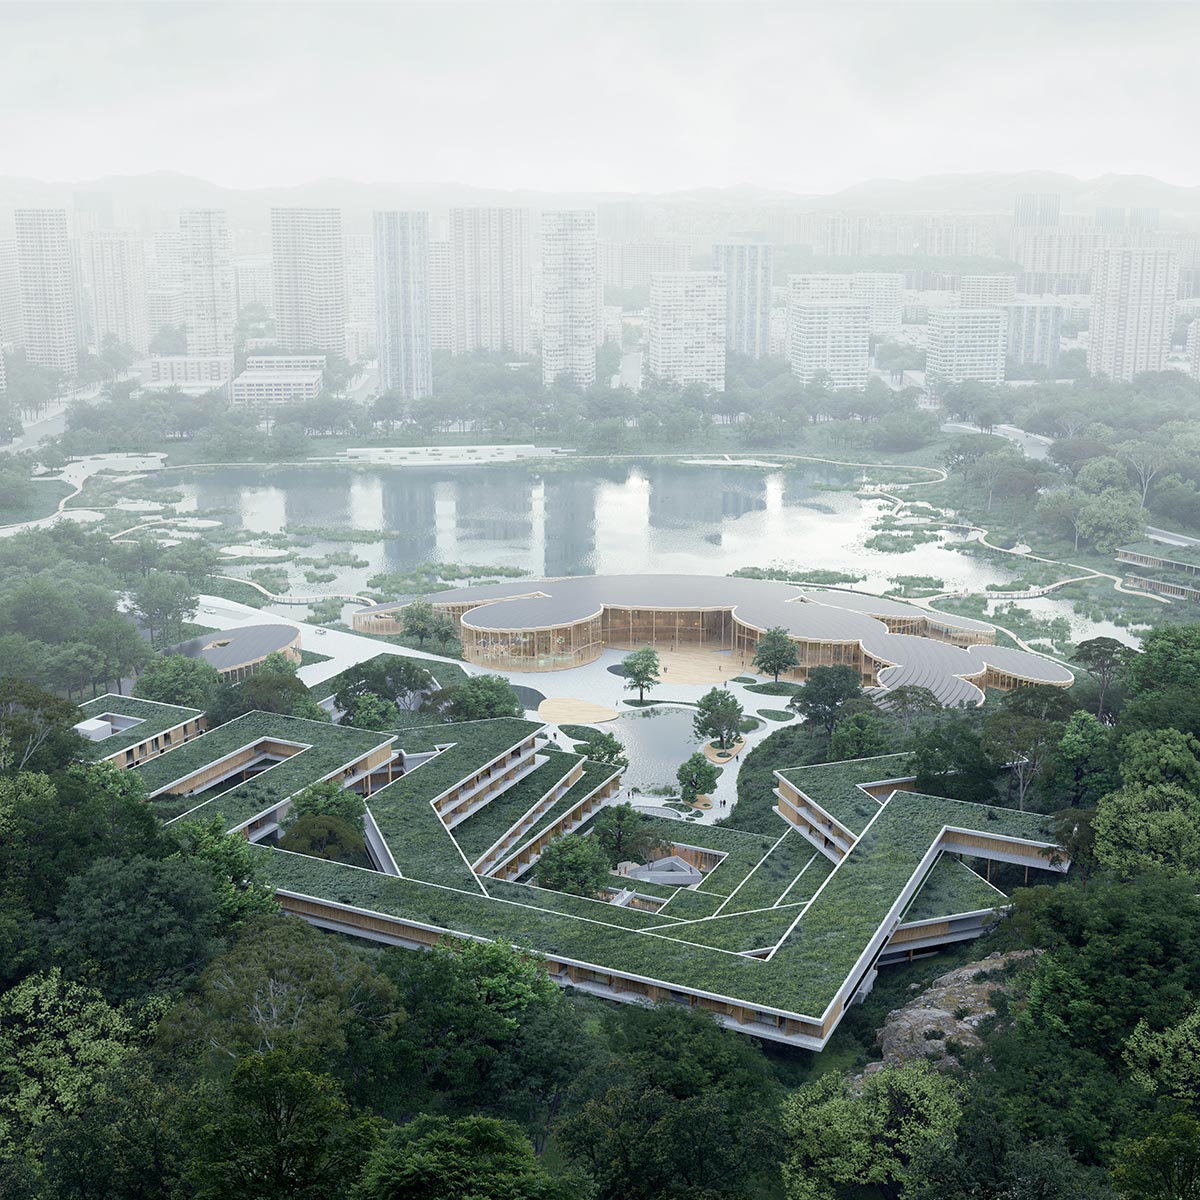 Mecanoo, Meng and Lola Landscape Architects selected to design Shenzhen Guangming Scientist Valley